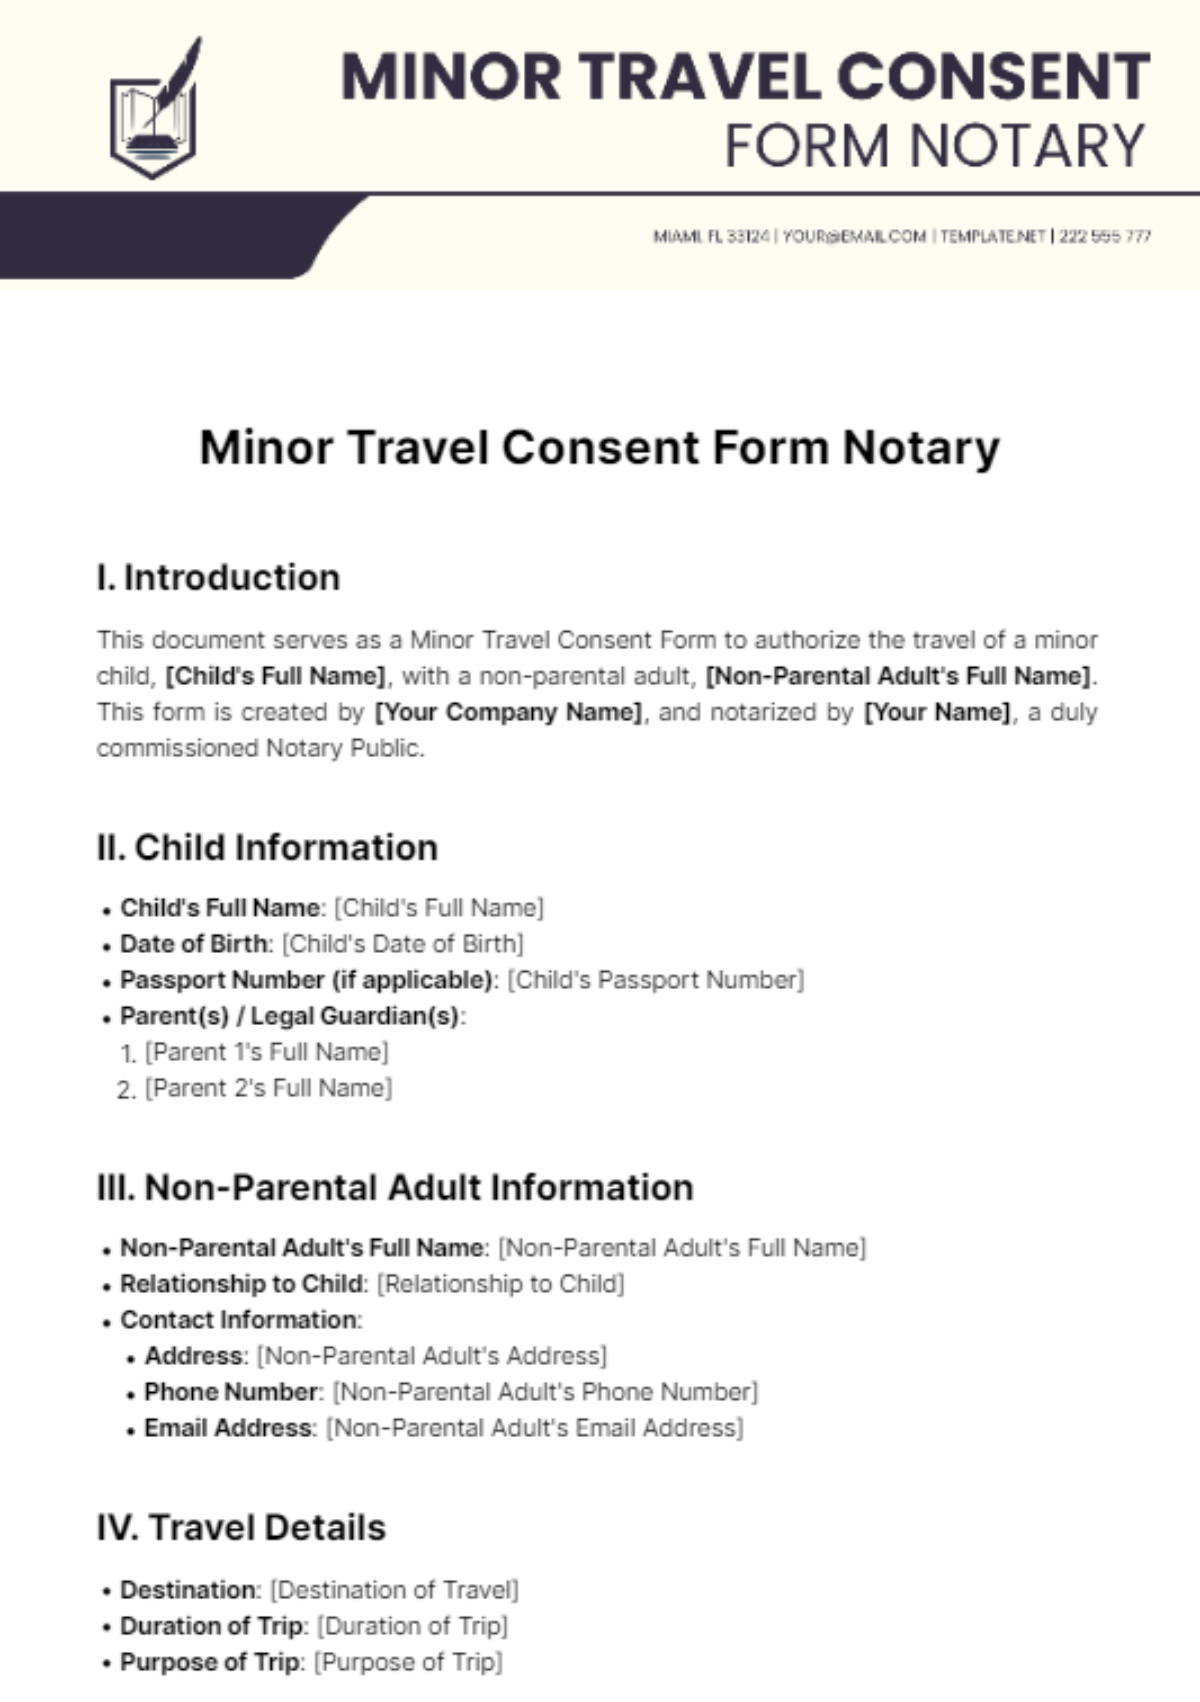 Free Minor Travel Consent Form Notary Template